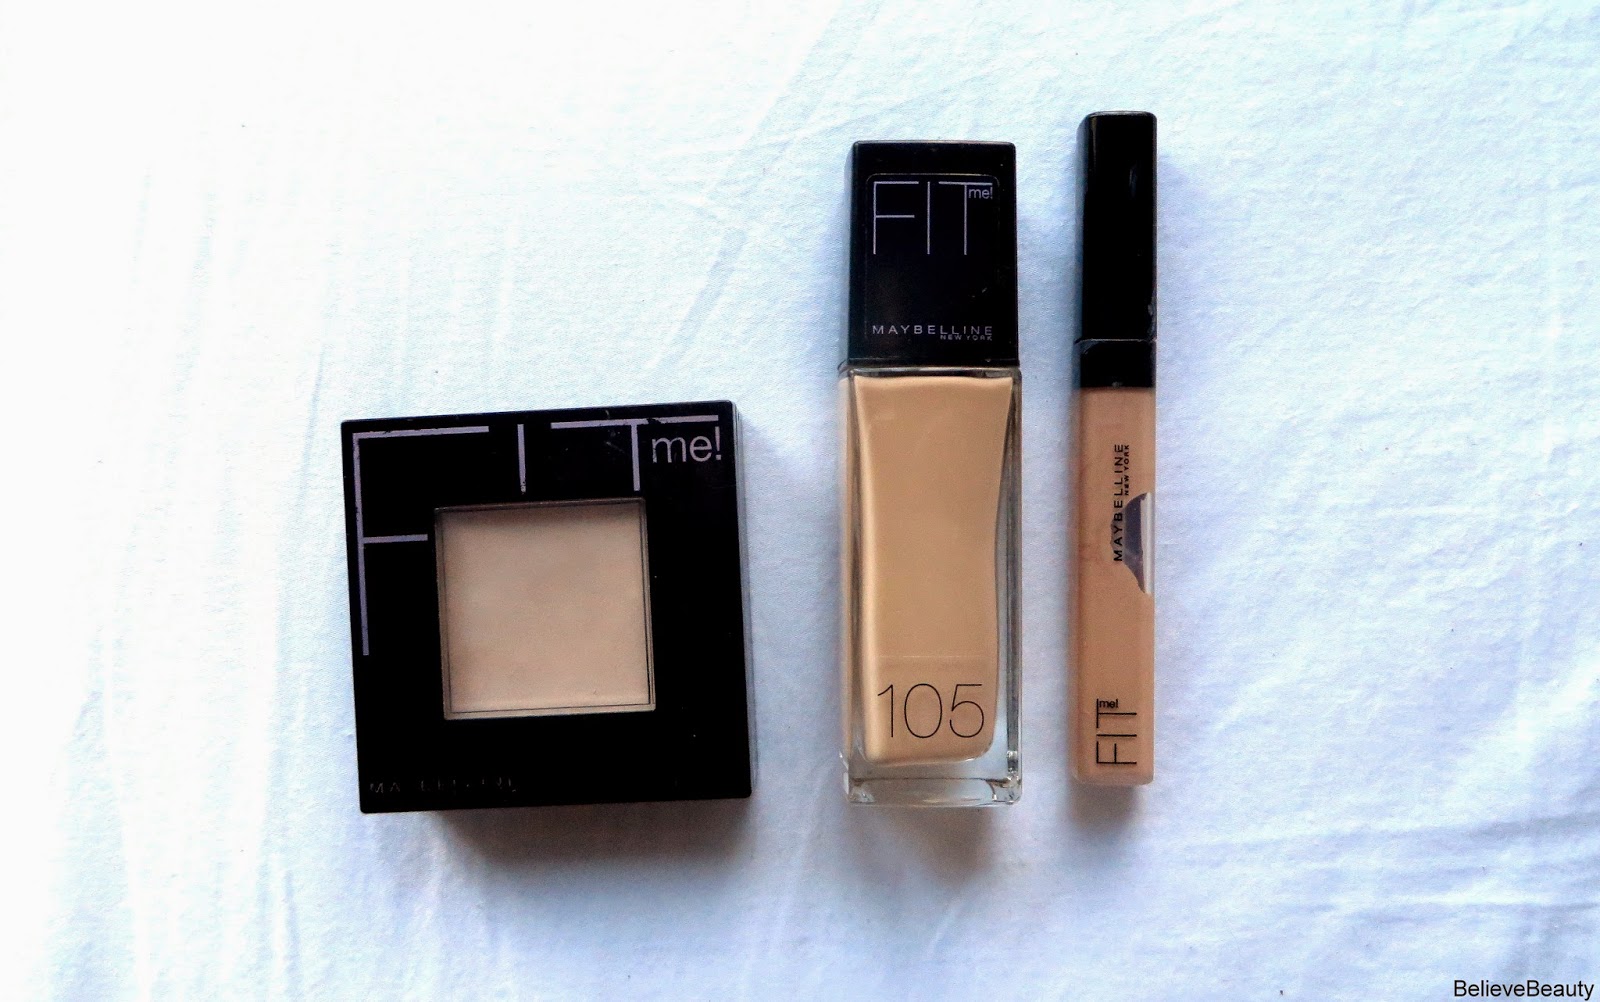 Believe Beauty: Maybelline Fit Me Liquid Foundation & Pressed Powder